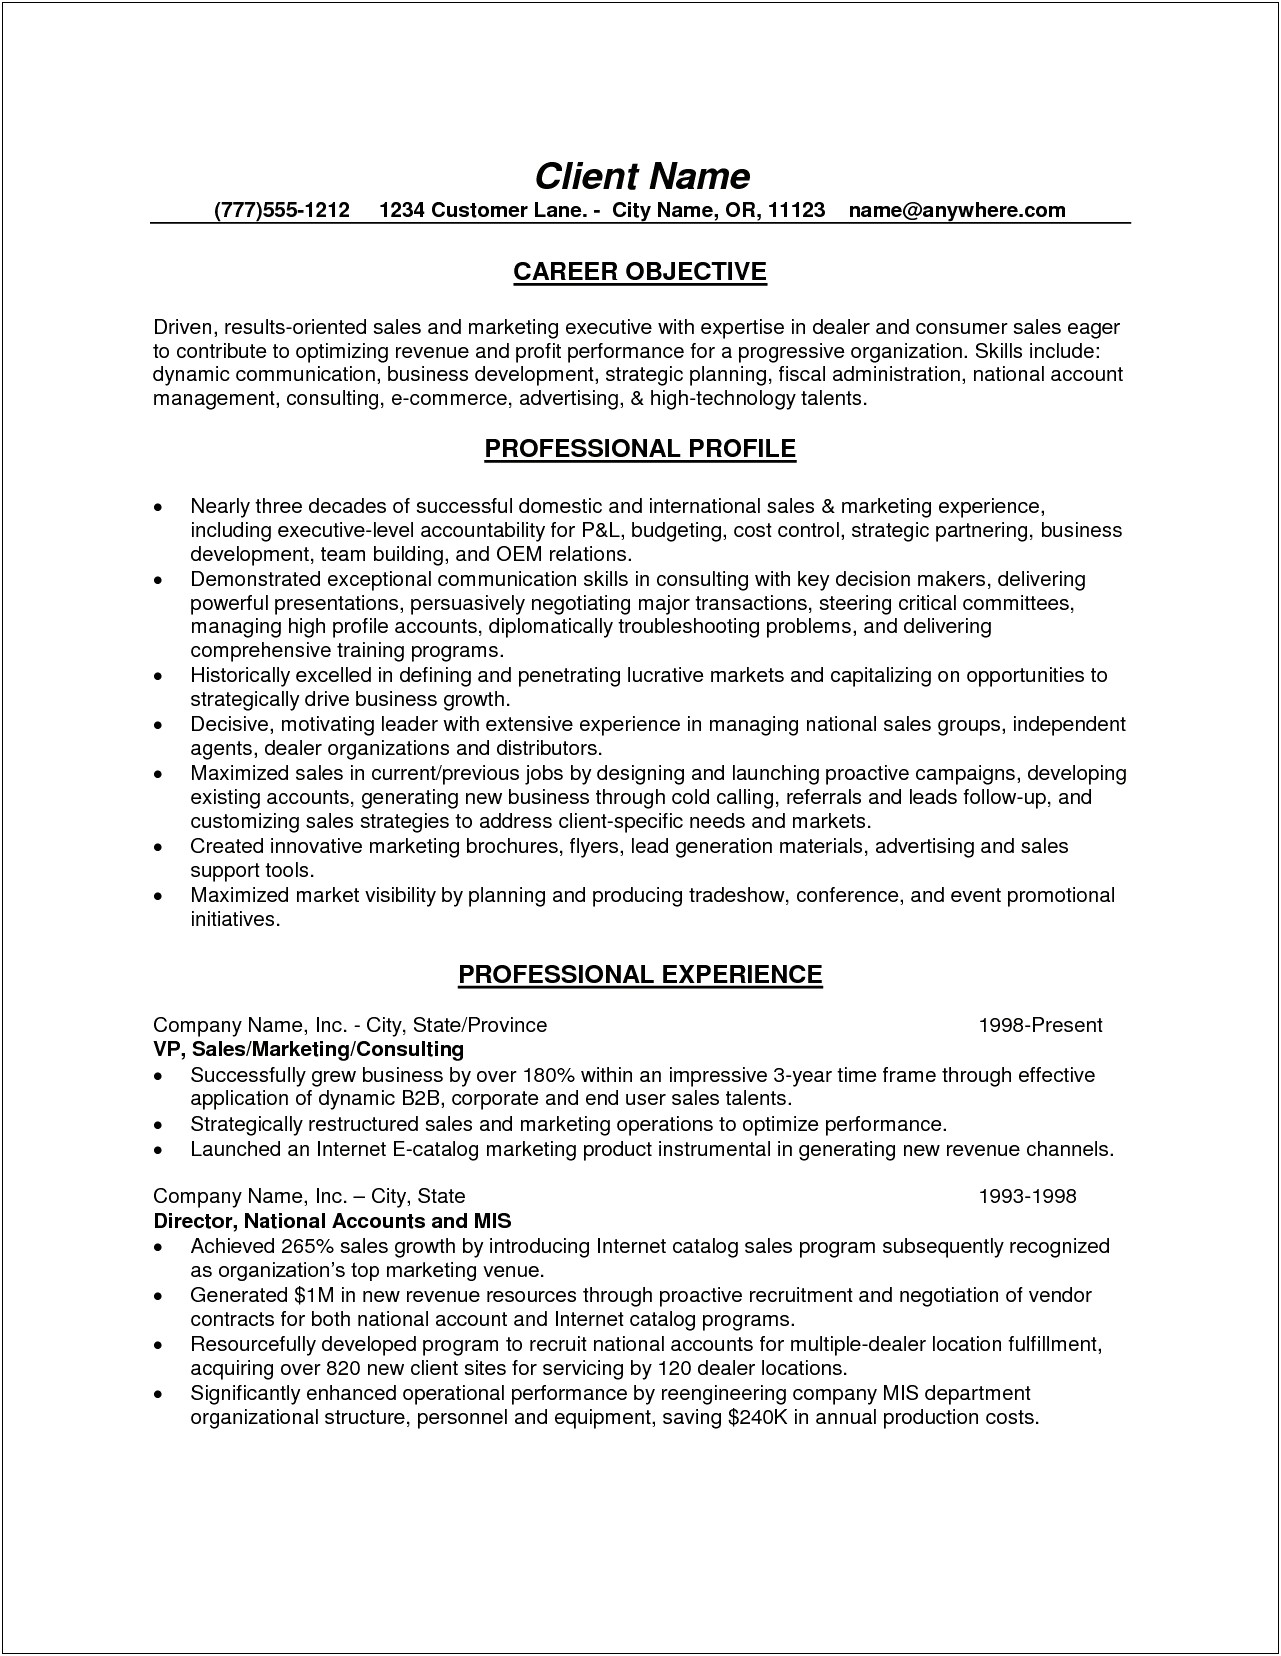 Resume Objective Statement For A Customer Service Job